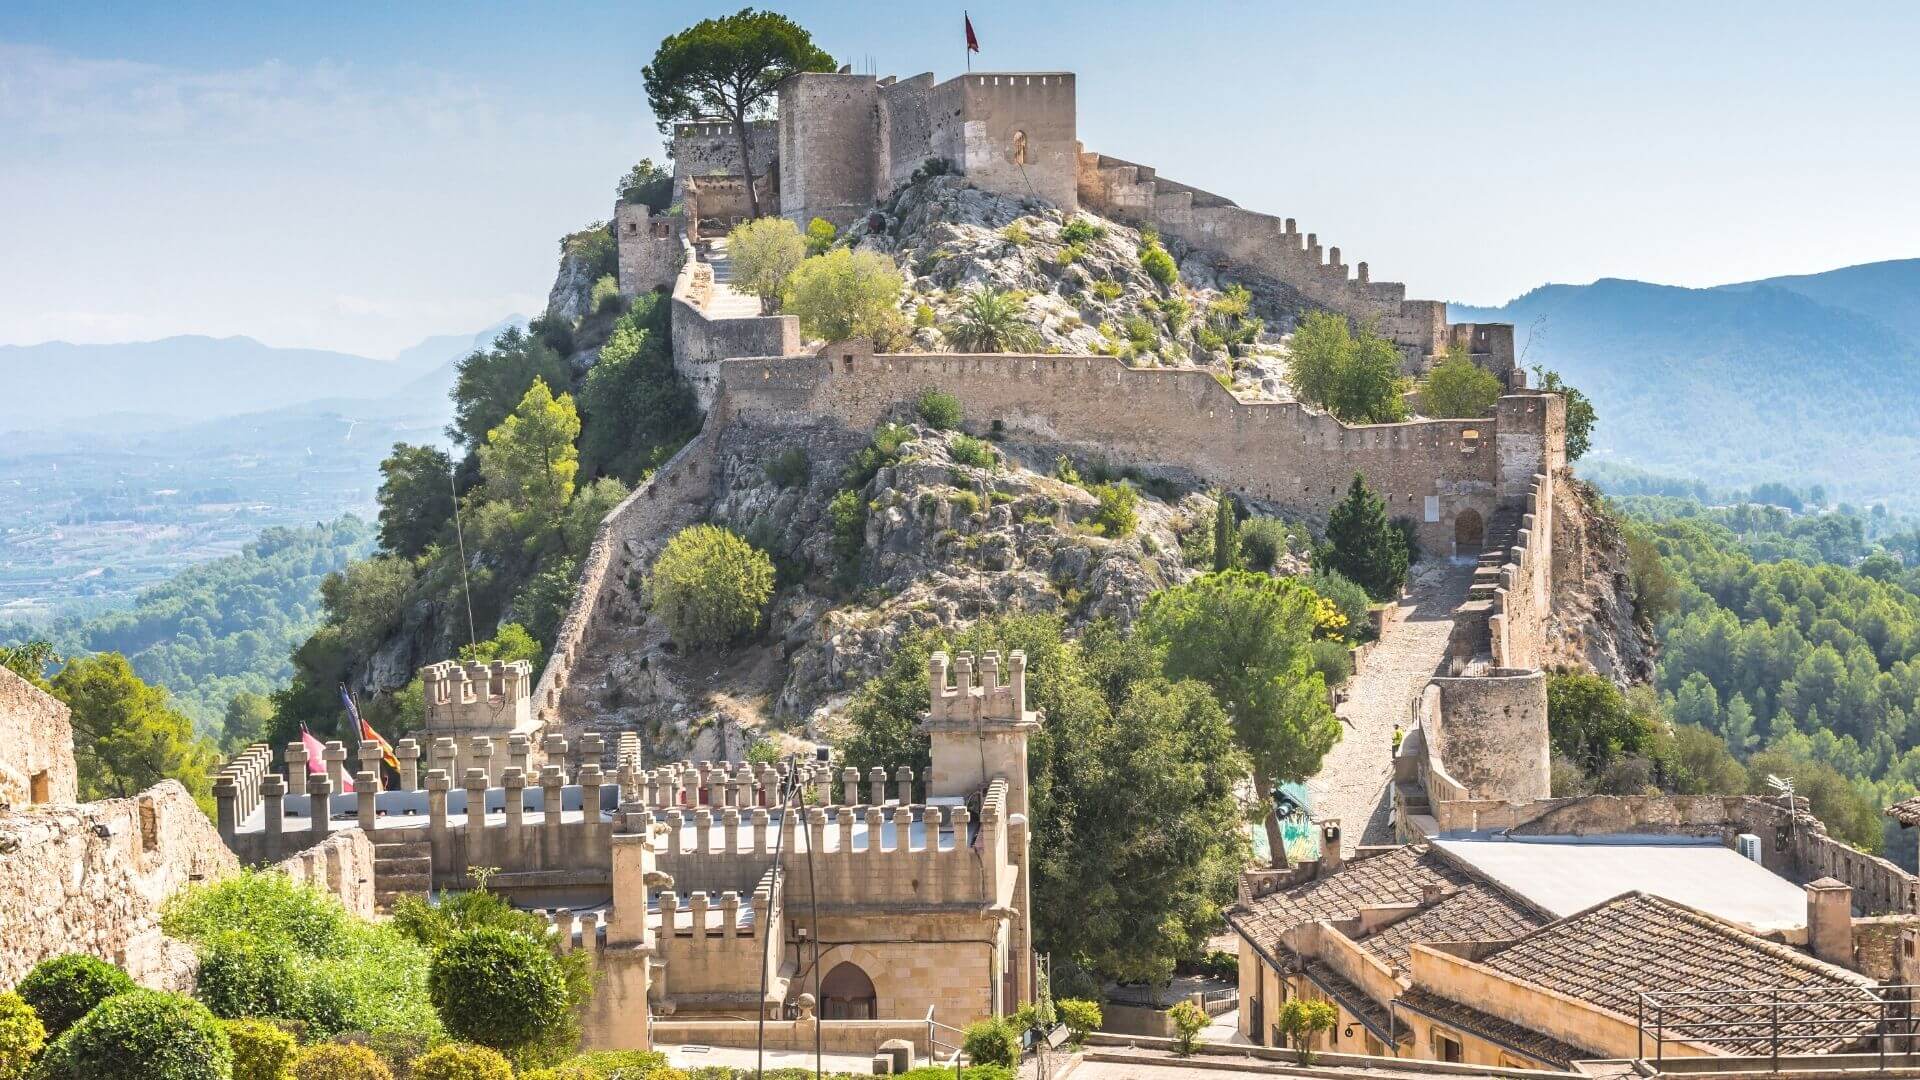 Relive great historic events at Xàtiva castle